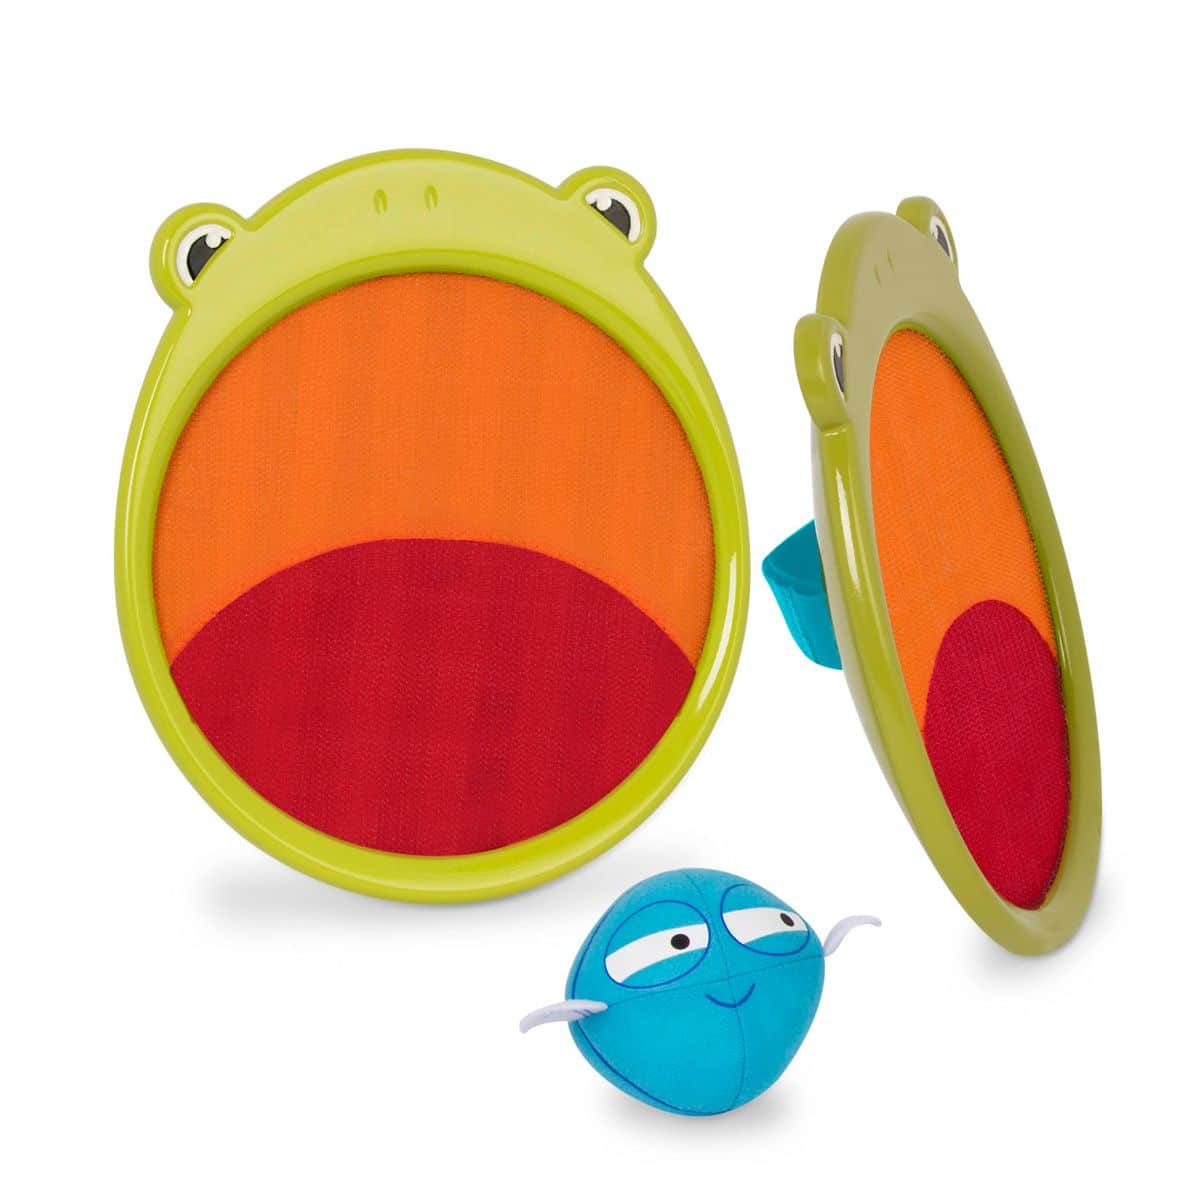 Frog design catch & toss game.